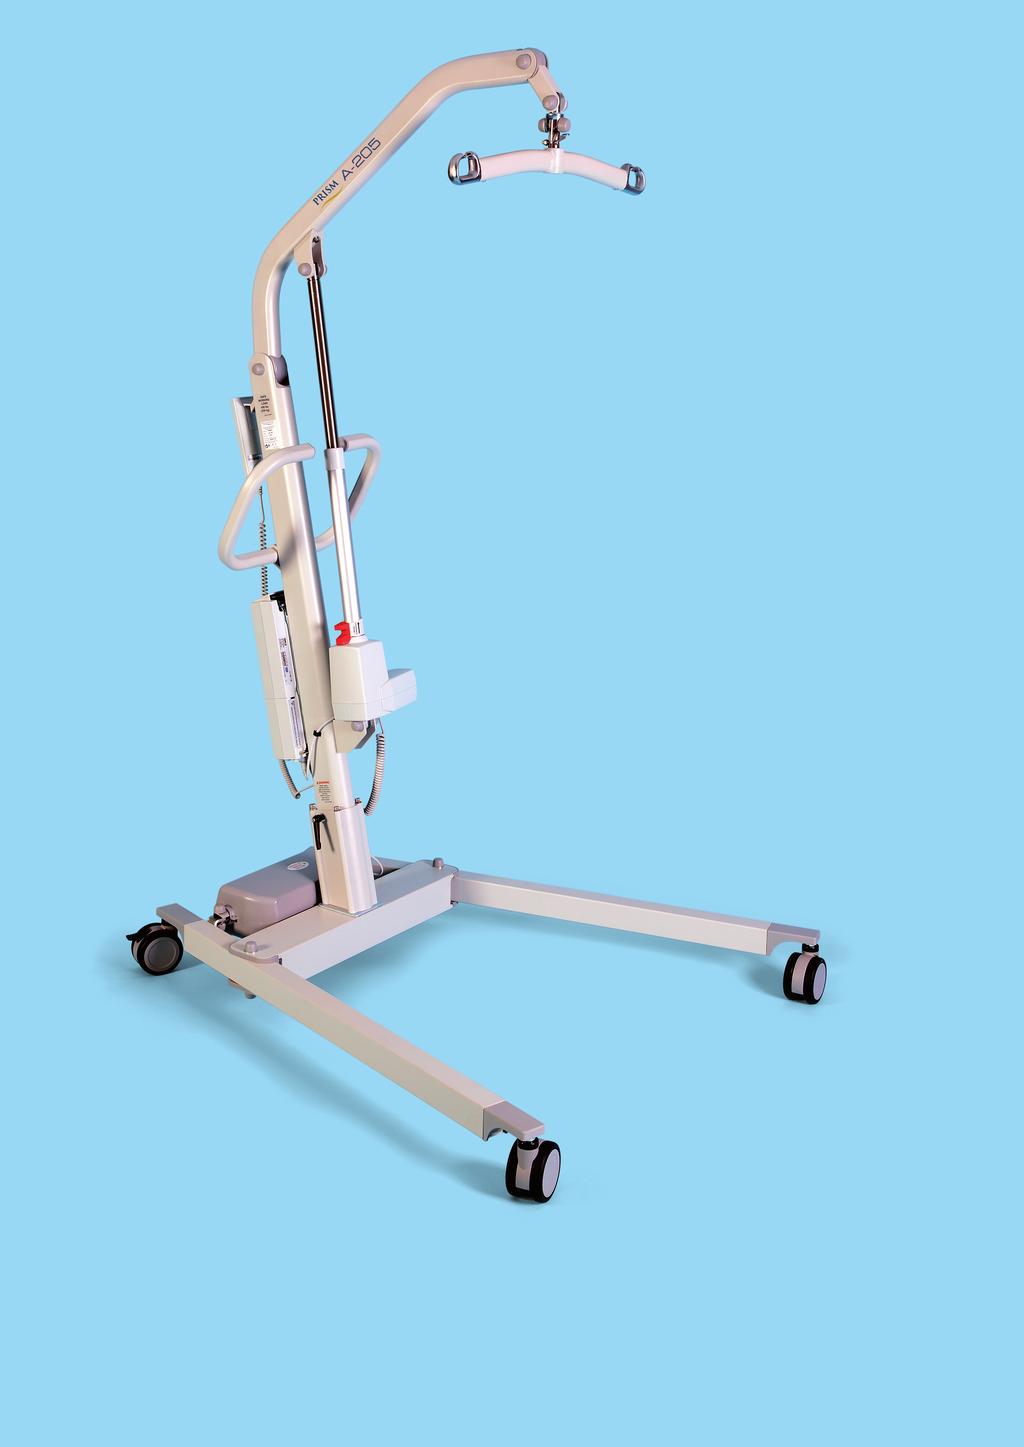 A-205 Aluminium Mobile Hoist The Prism A-205 Aluminium Mobile Hoist is a versatile hoist offering innovative design and a host of features, whilst providing a cost effective solution for easy